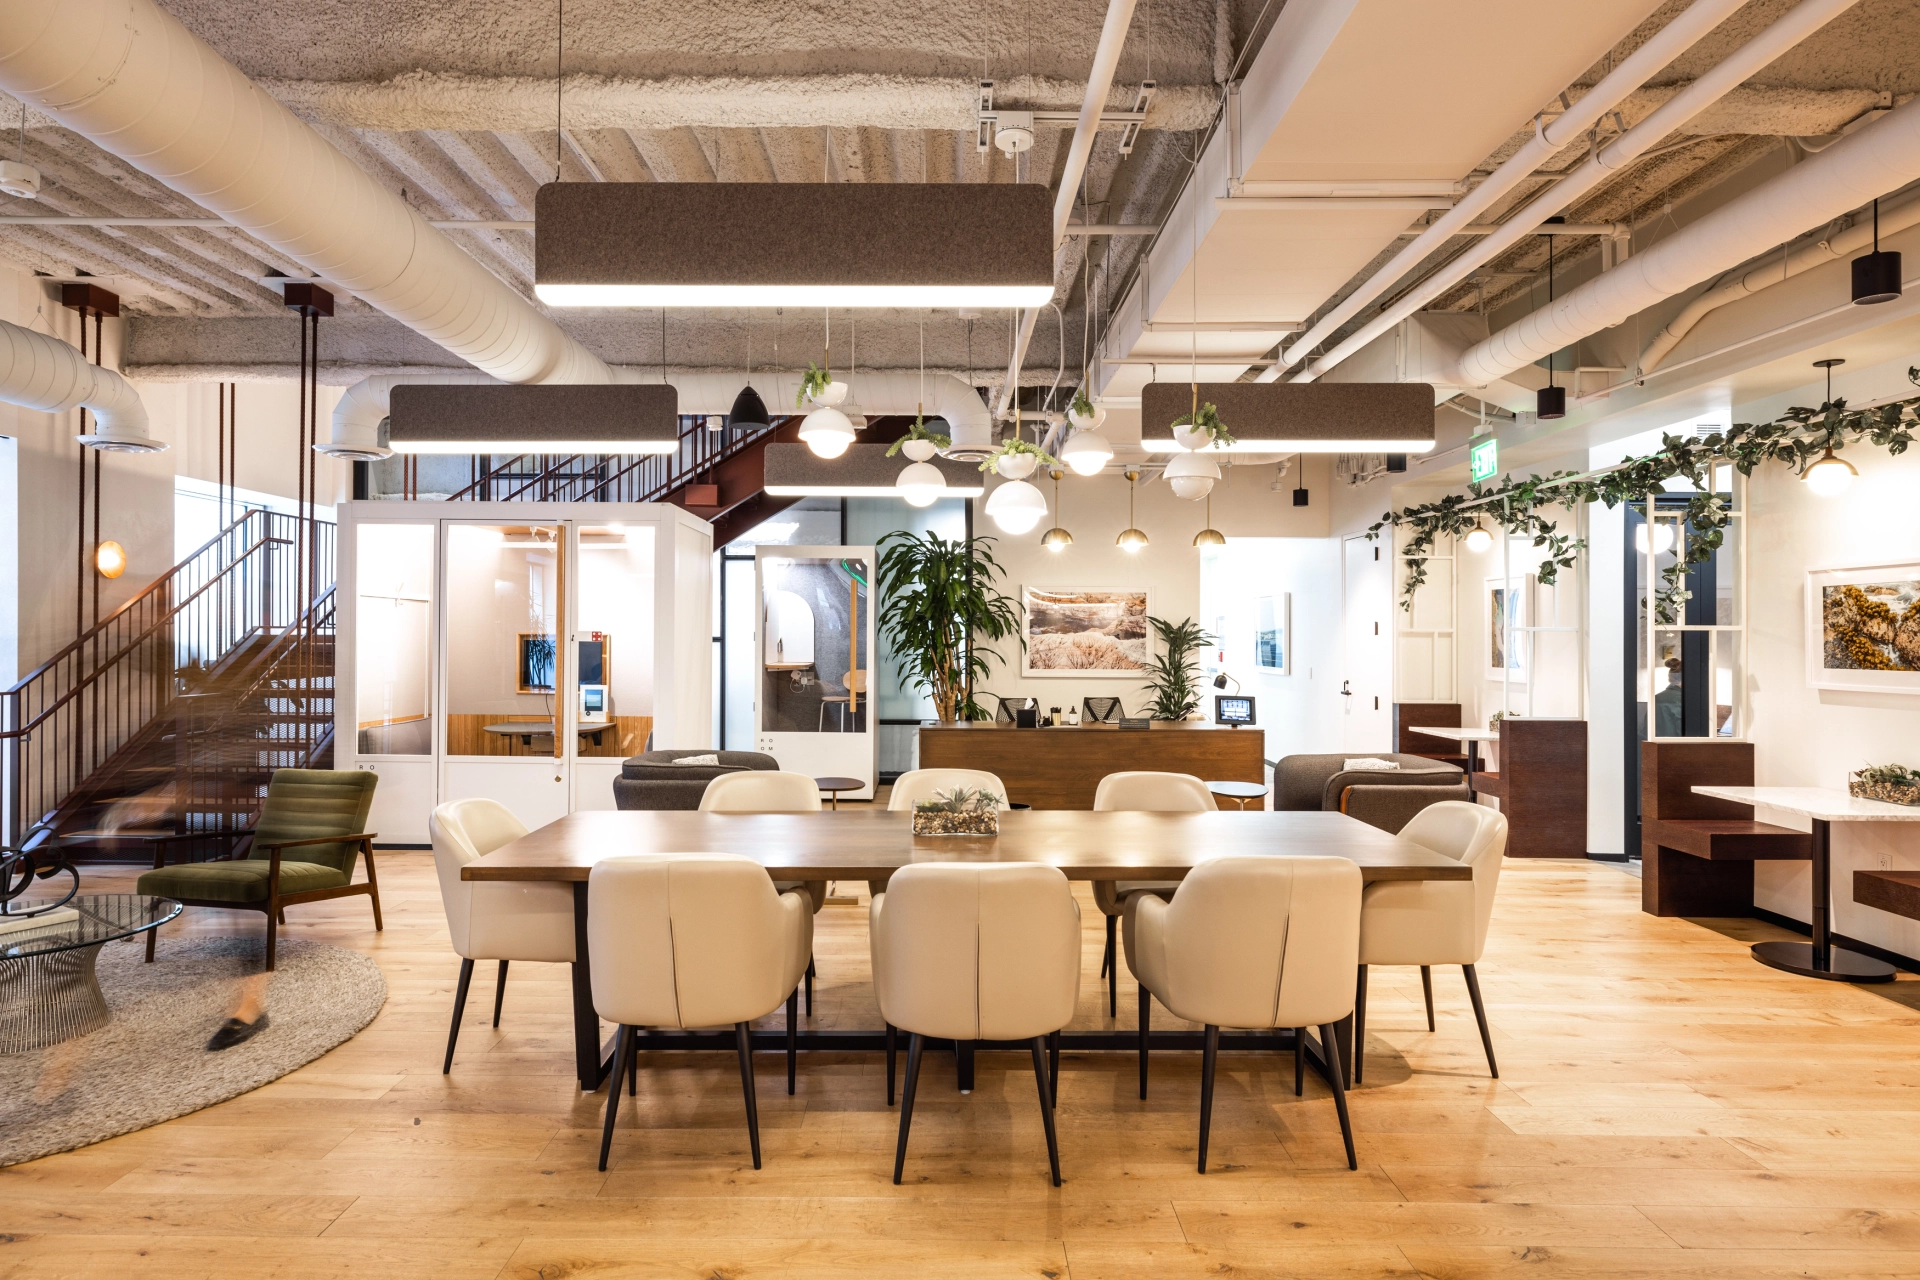 A San Francisco office outfitted with a dining table for meetings.